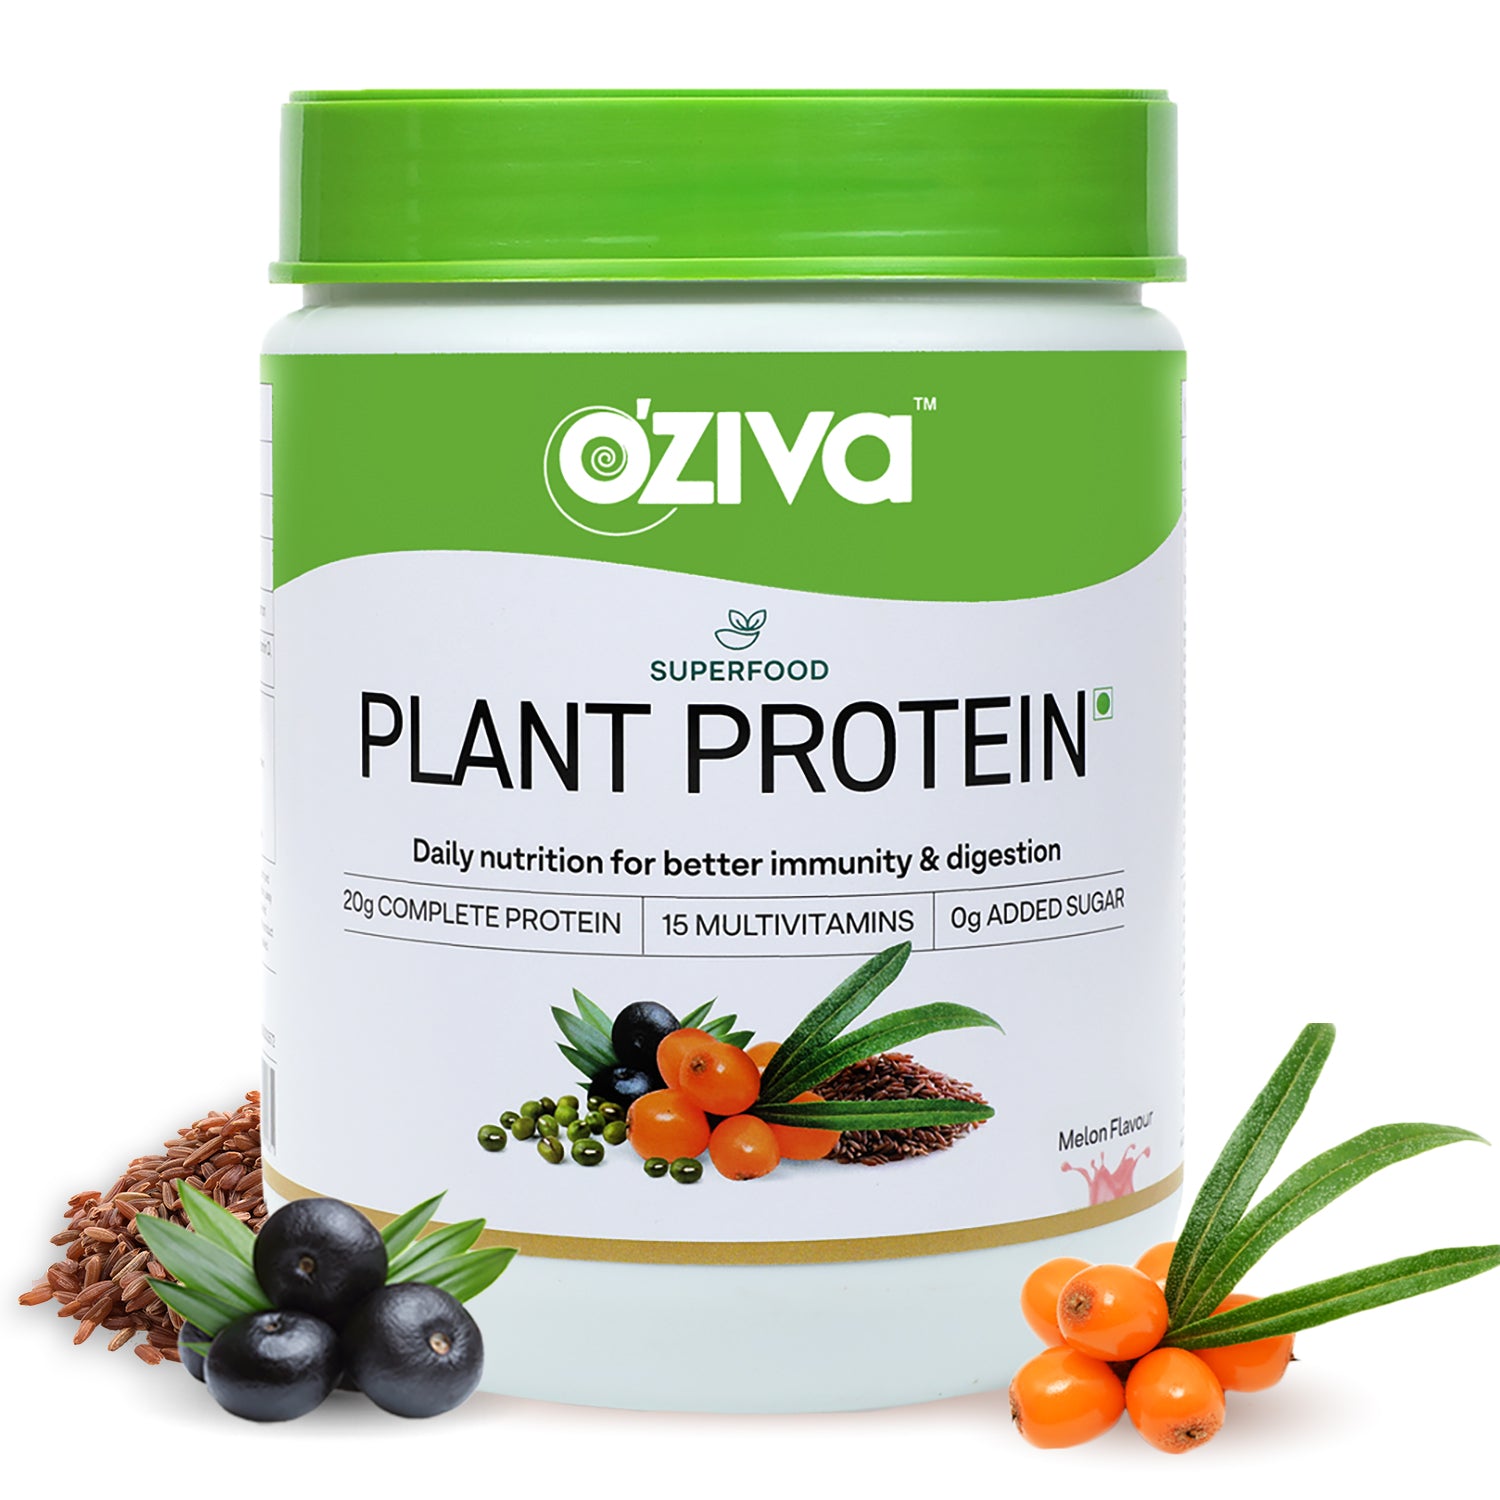 OZiva Superfood Plant Protein, 20g Complete Protein